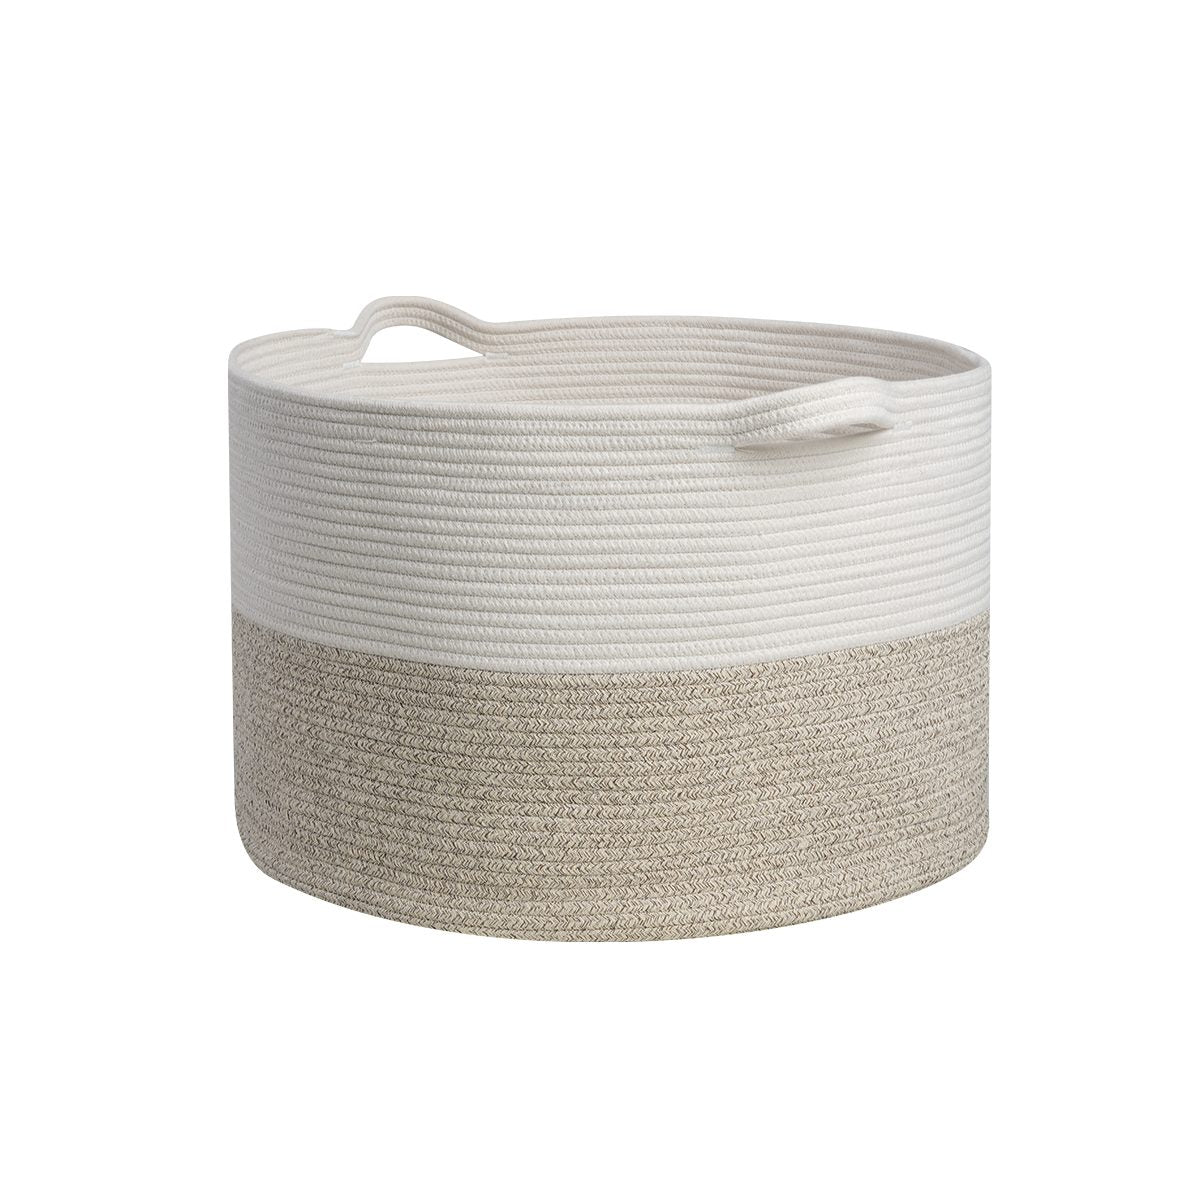 Woven Storage Basket Cotton Rope Basket with Handles